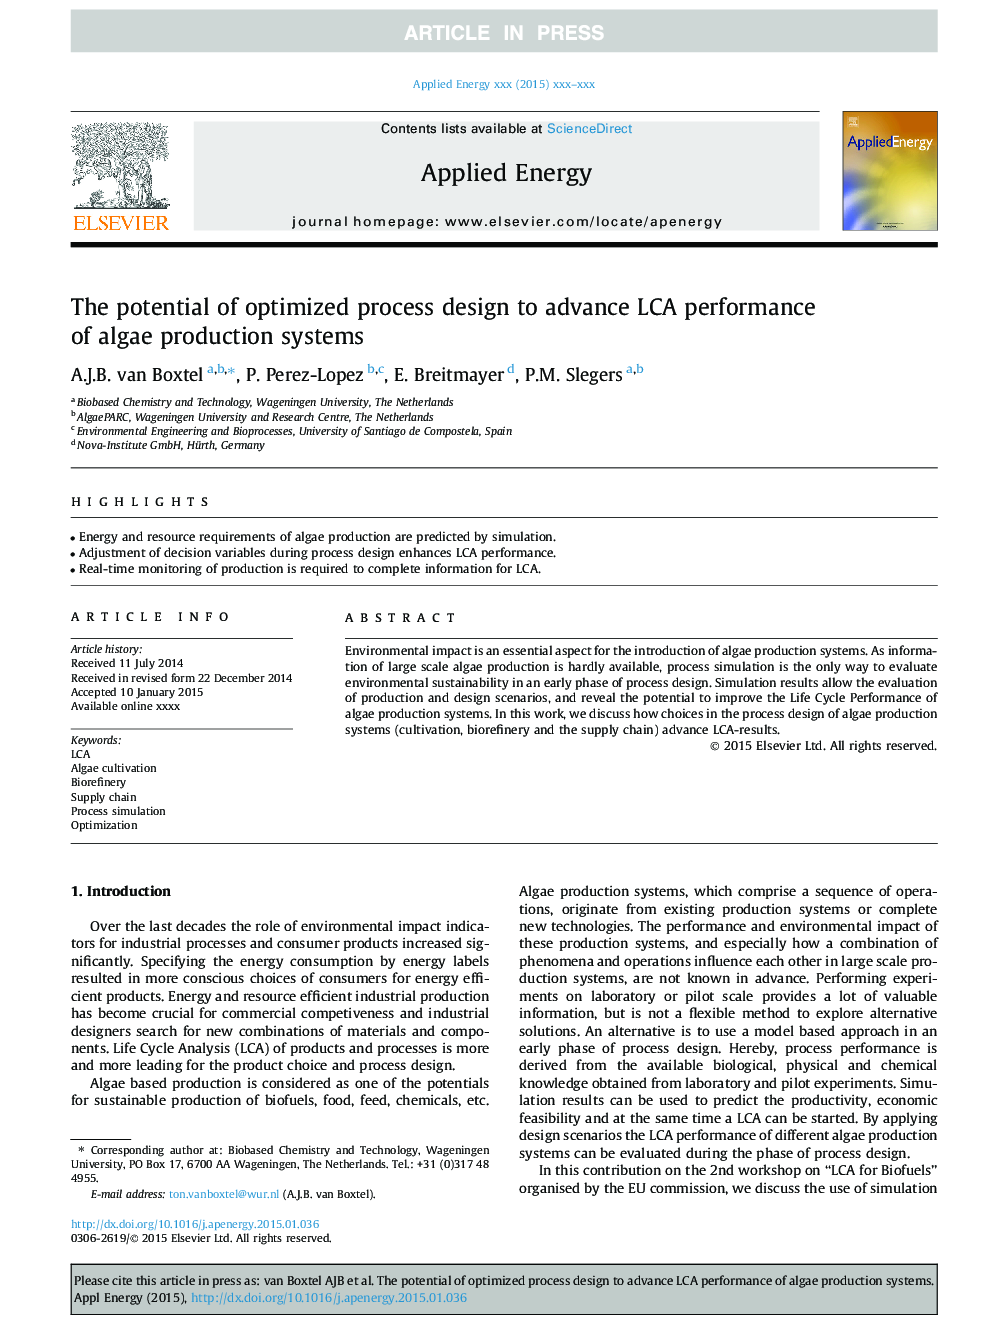 The potential of optimized process design to advance LCA performance of algae production systems